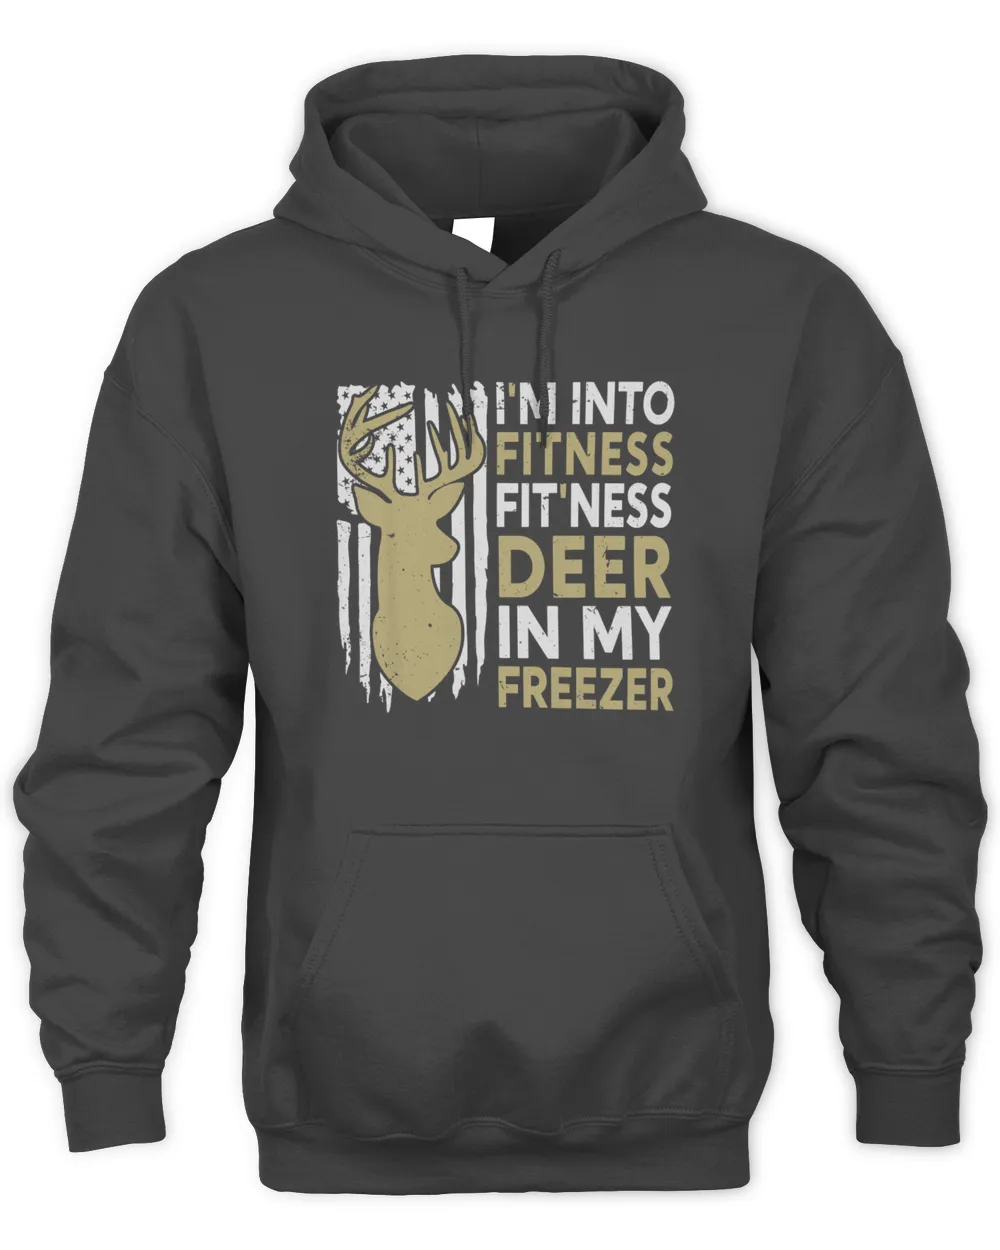 Funny I'm Into Fitness Fit'Ness Deer In My Freezer Deer T-Shirt